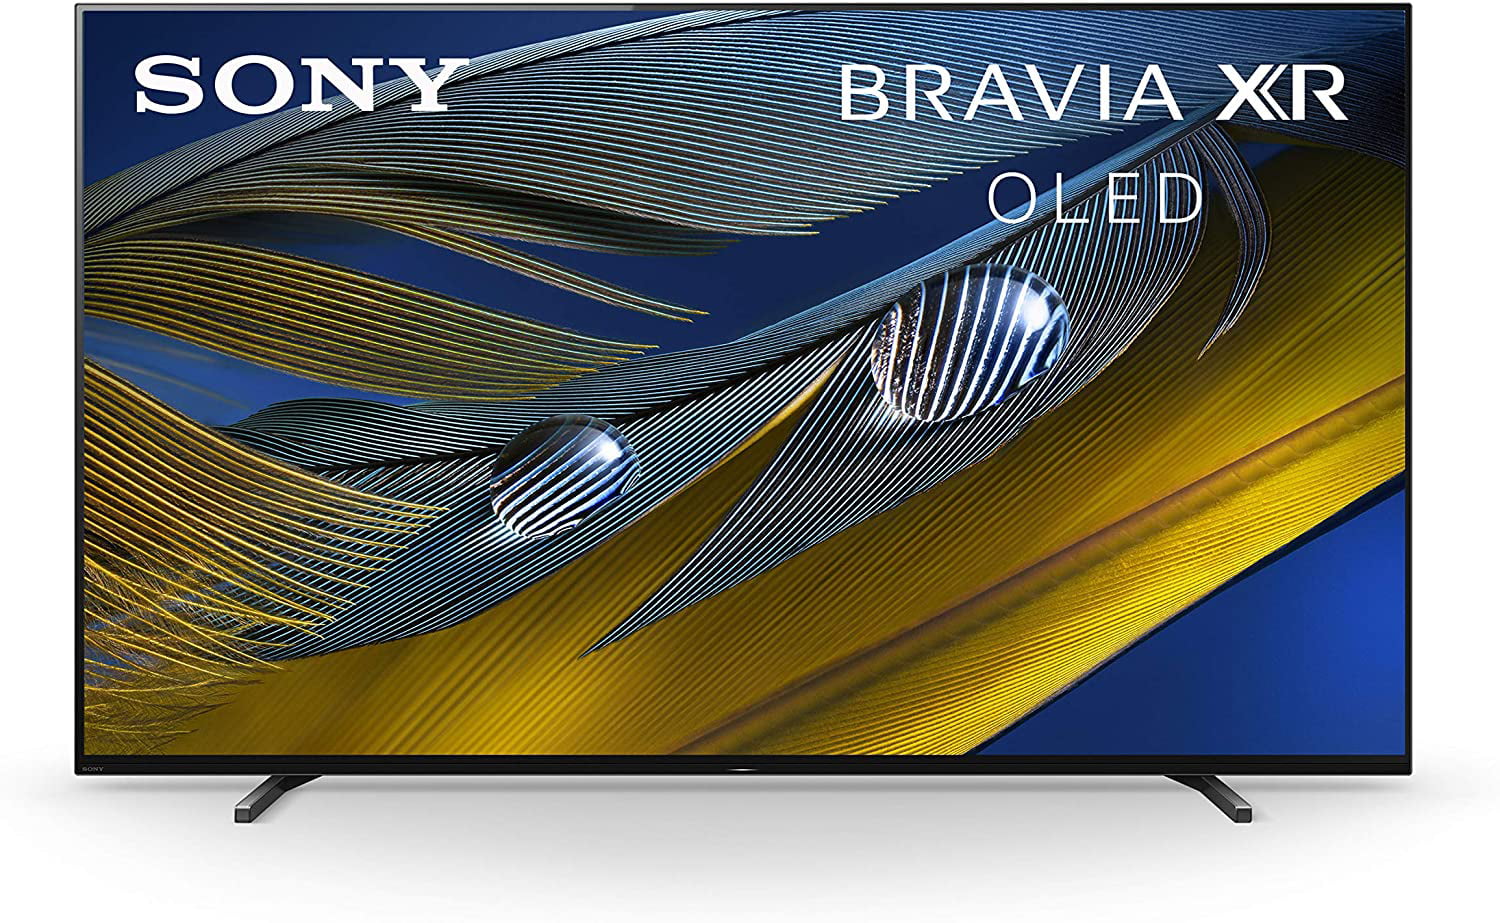 Sony A80J 55 inch BRAVIA XR OLED 4K Ultra HD HDR Smart Google TV with